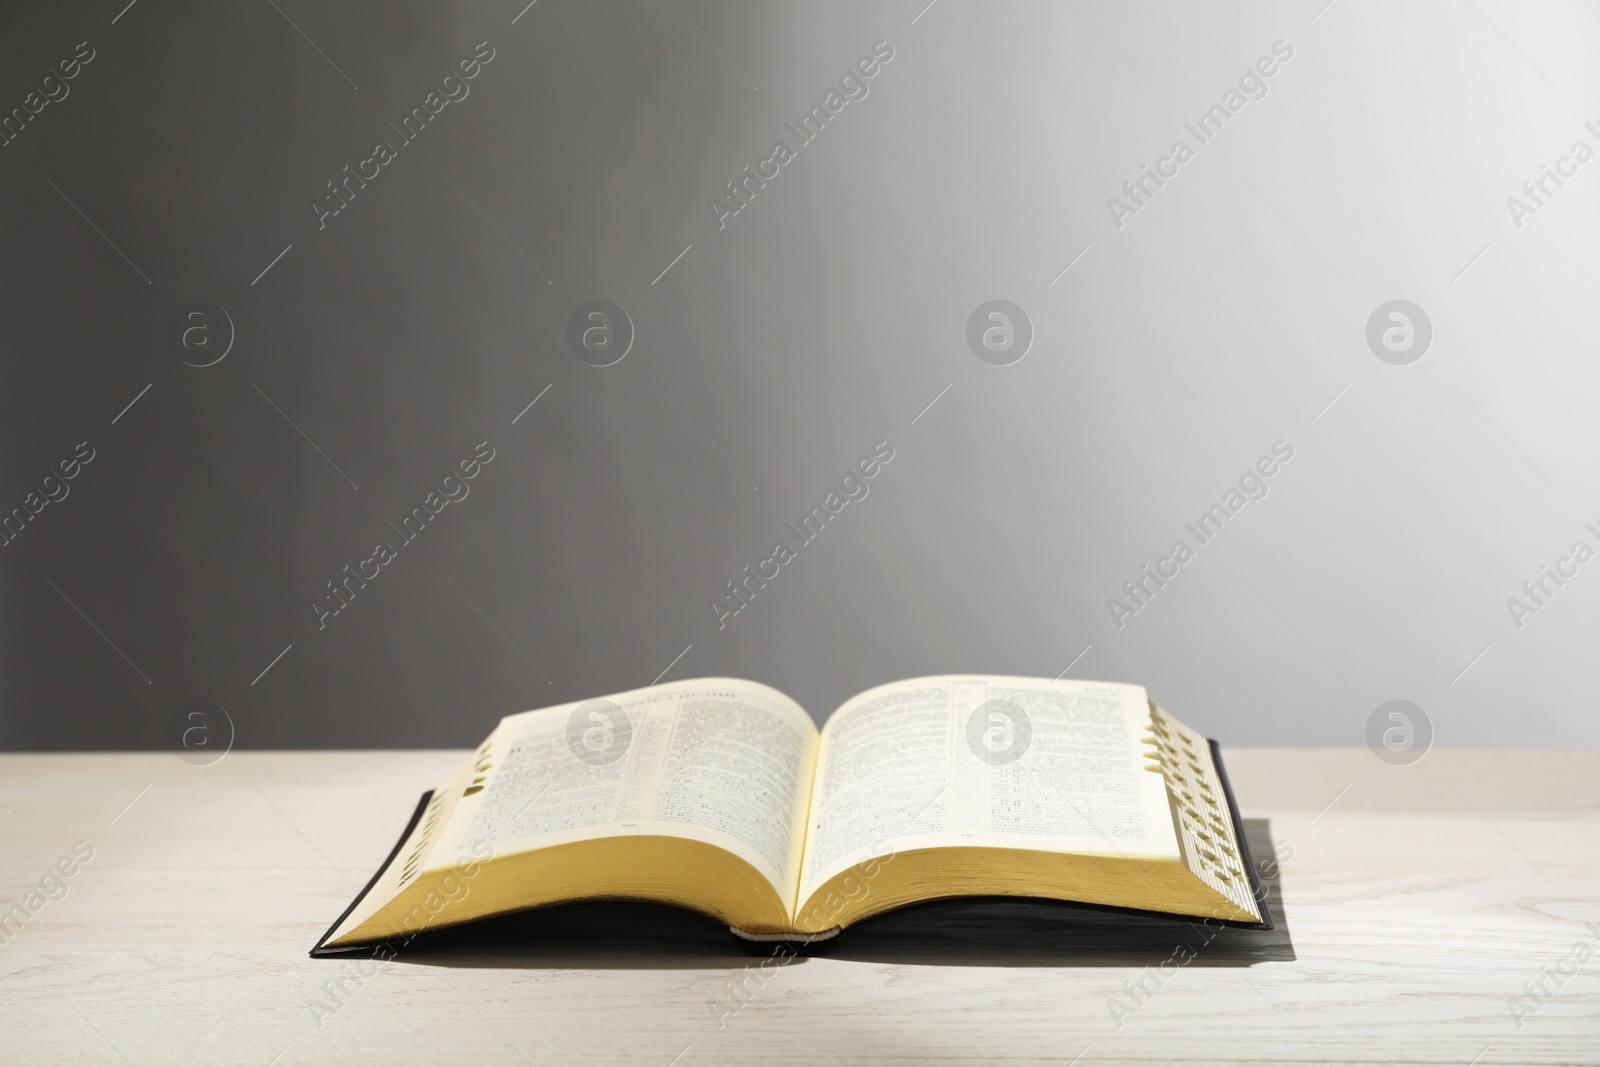 Photo of Open Bible on white wooden table against light grey background. Christian religious book